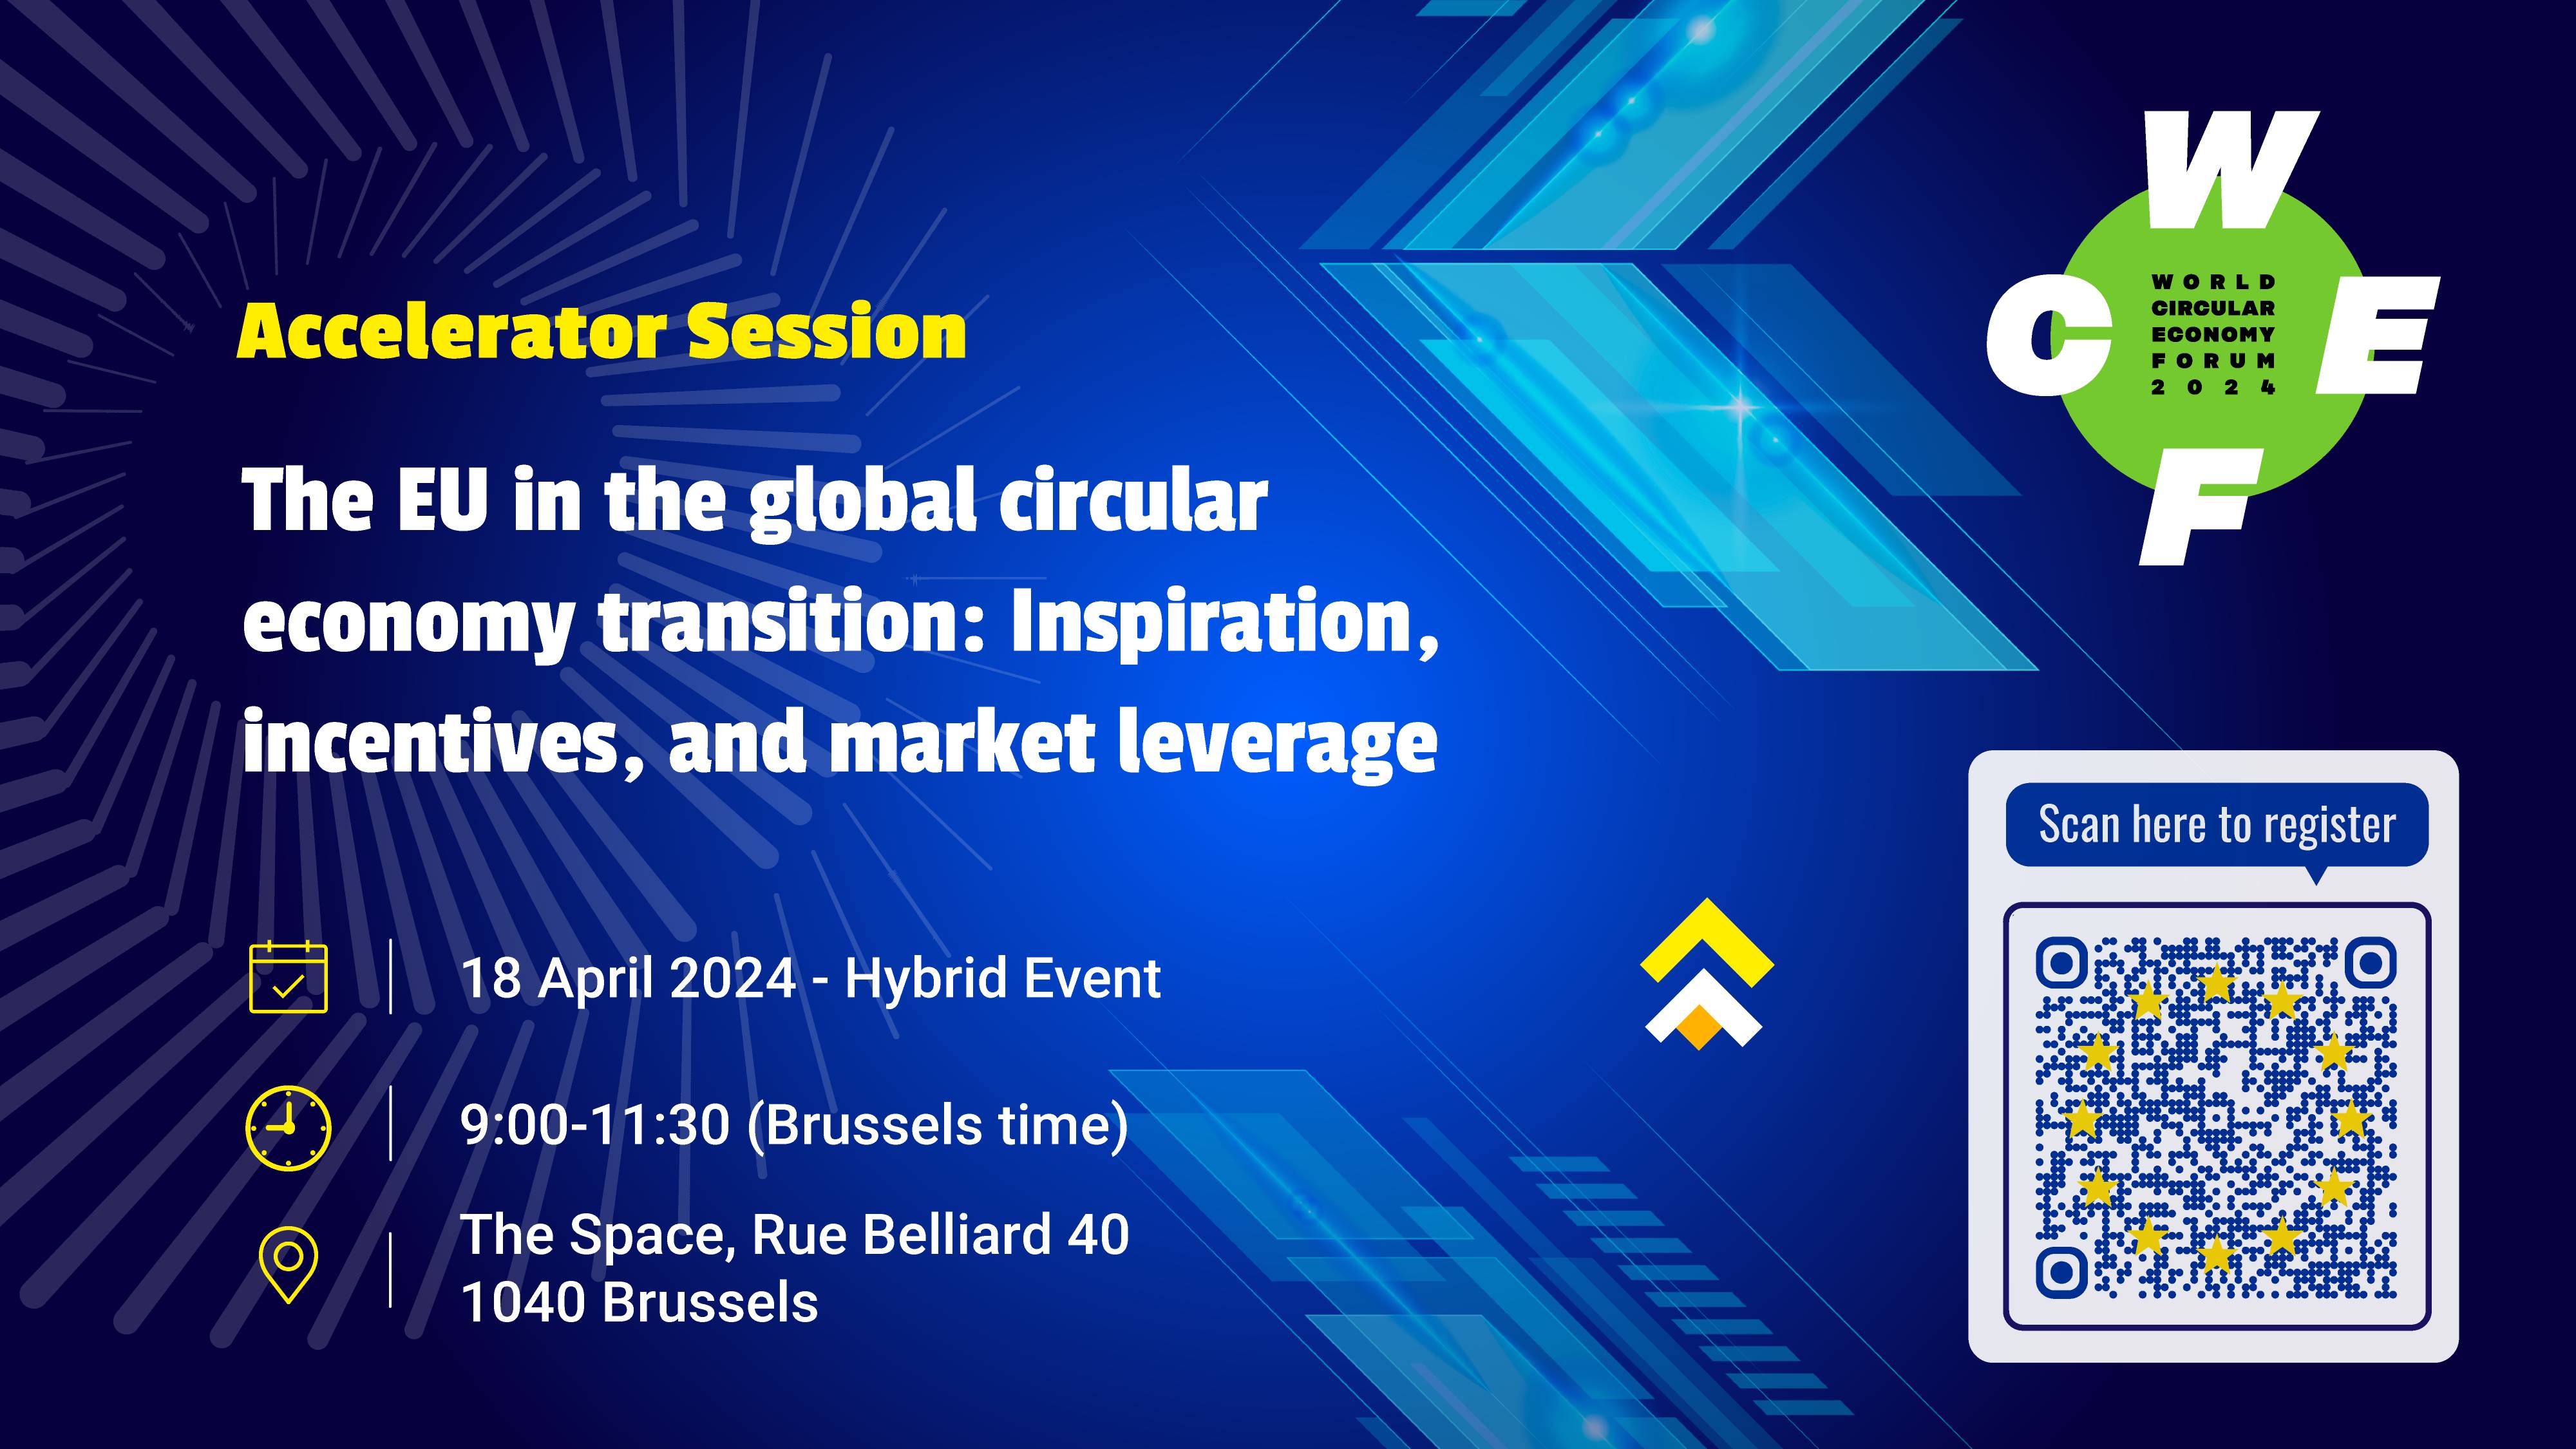 The EU in the global circular economy transition: Inspiration, incentives, and market leverage